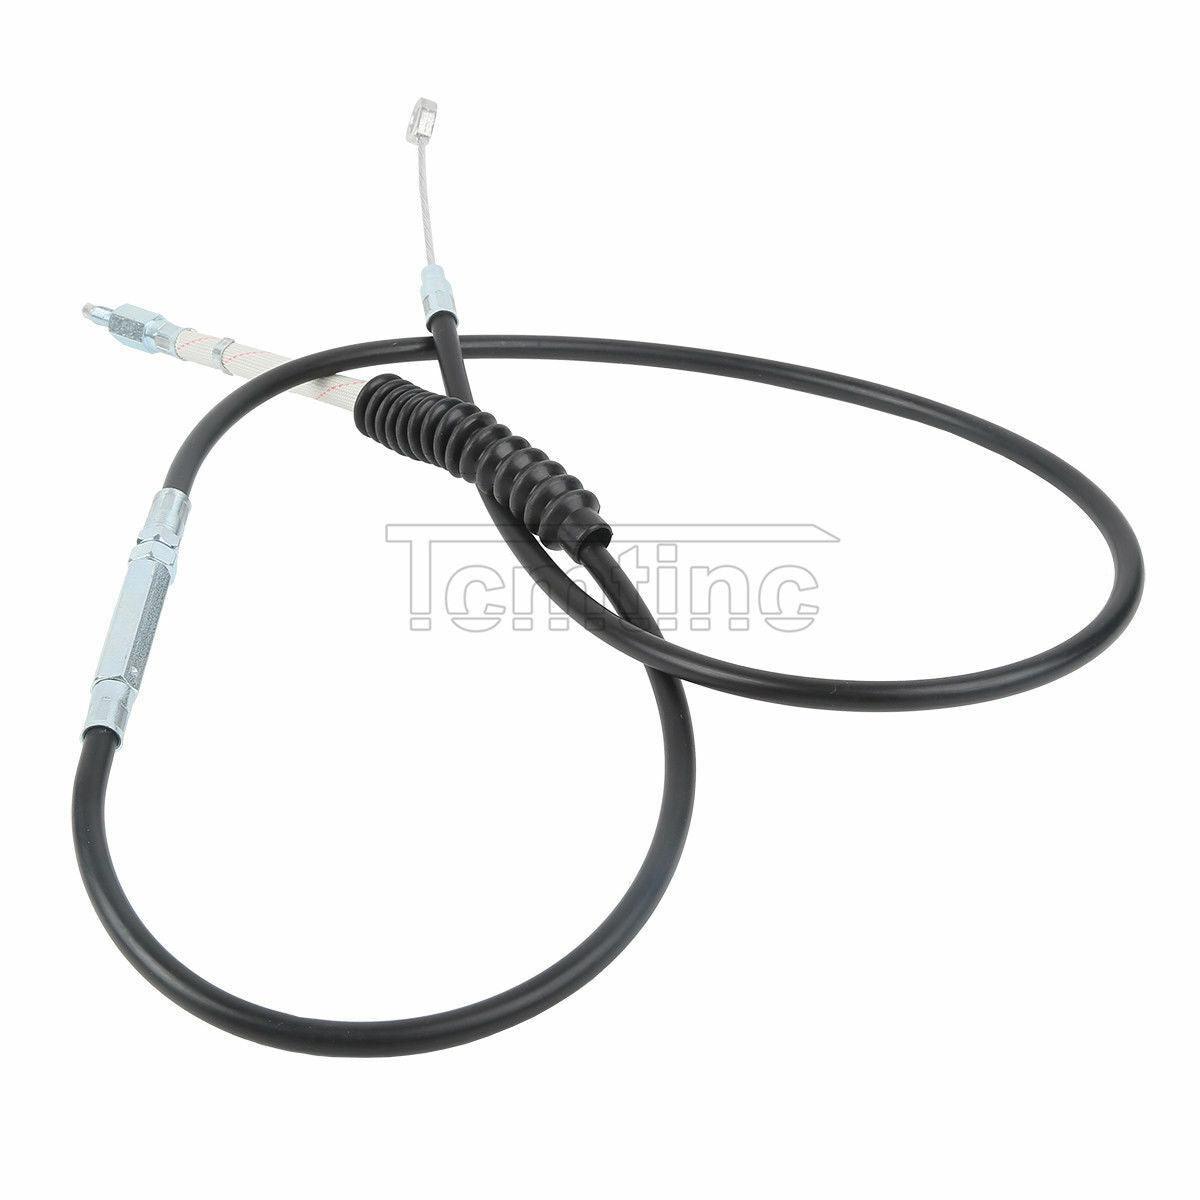 74.8" 190cm Clutch Cable Fit For Harley Road Glide Road King FLHX 2008-2013 - Moto Life Products